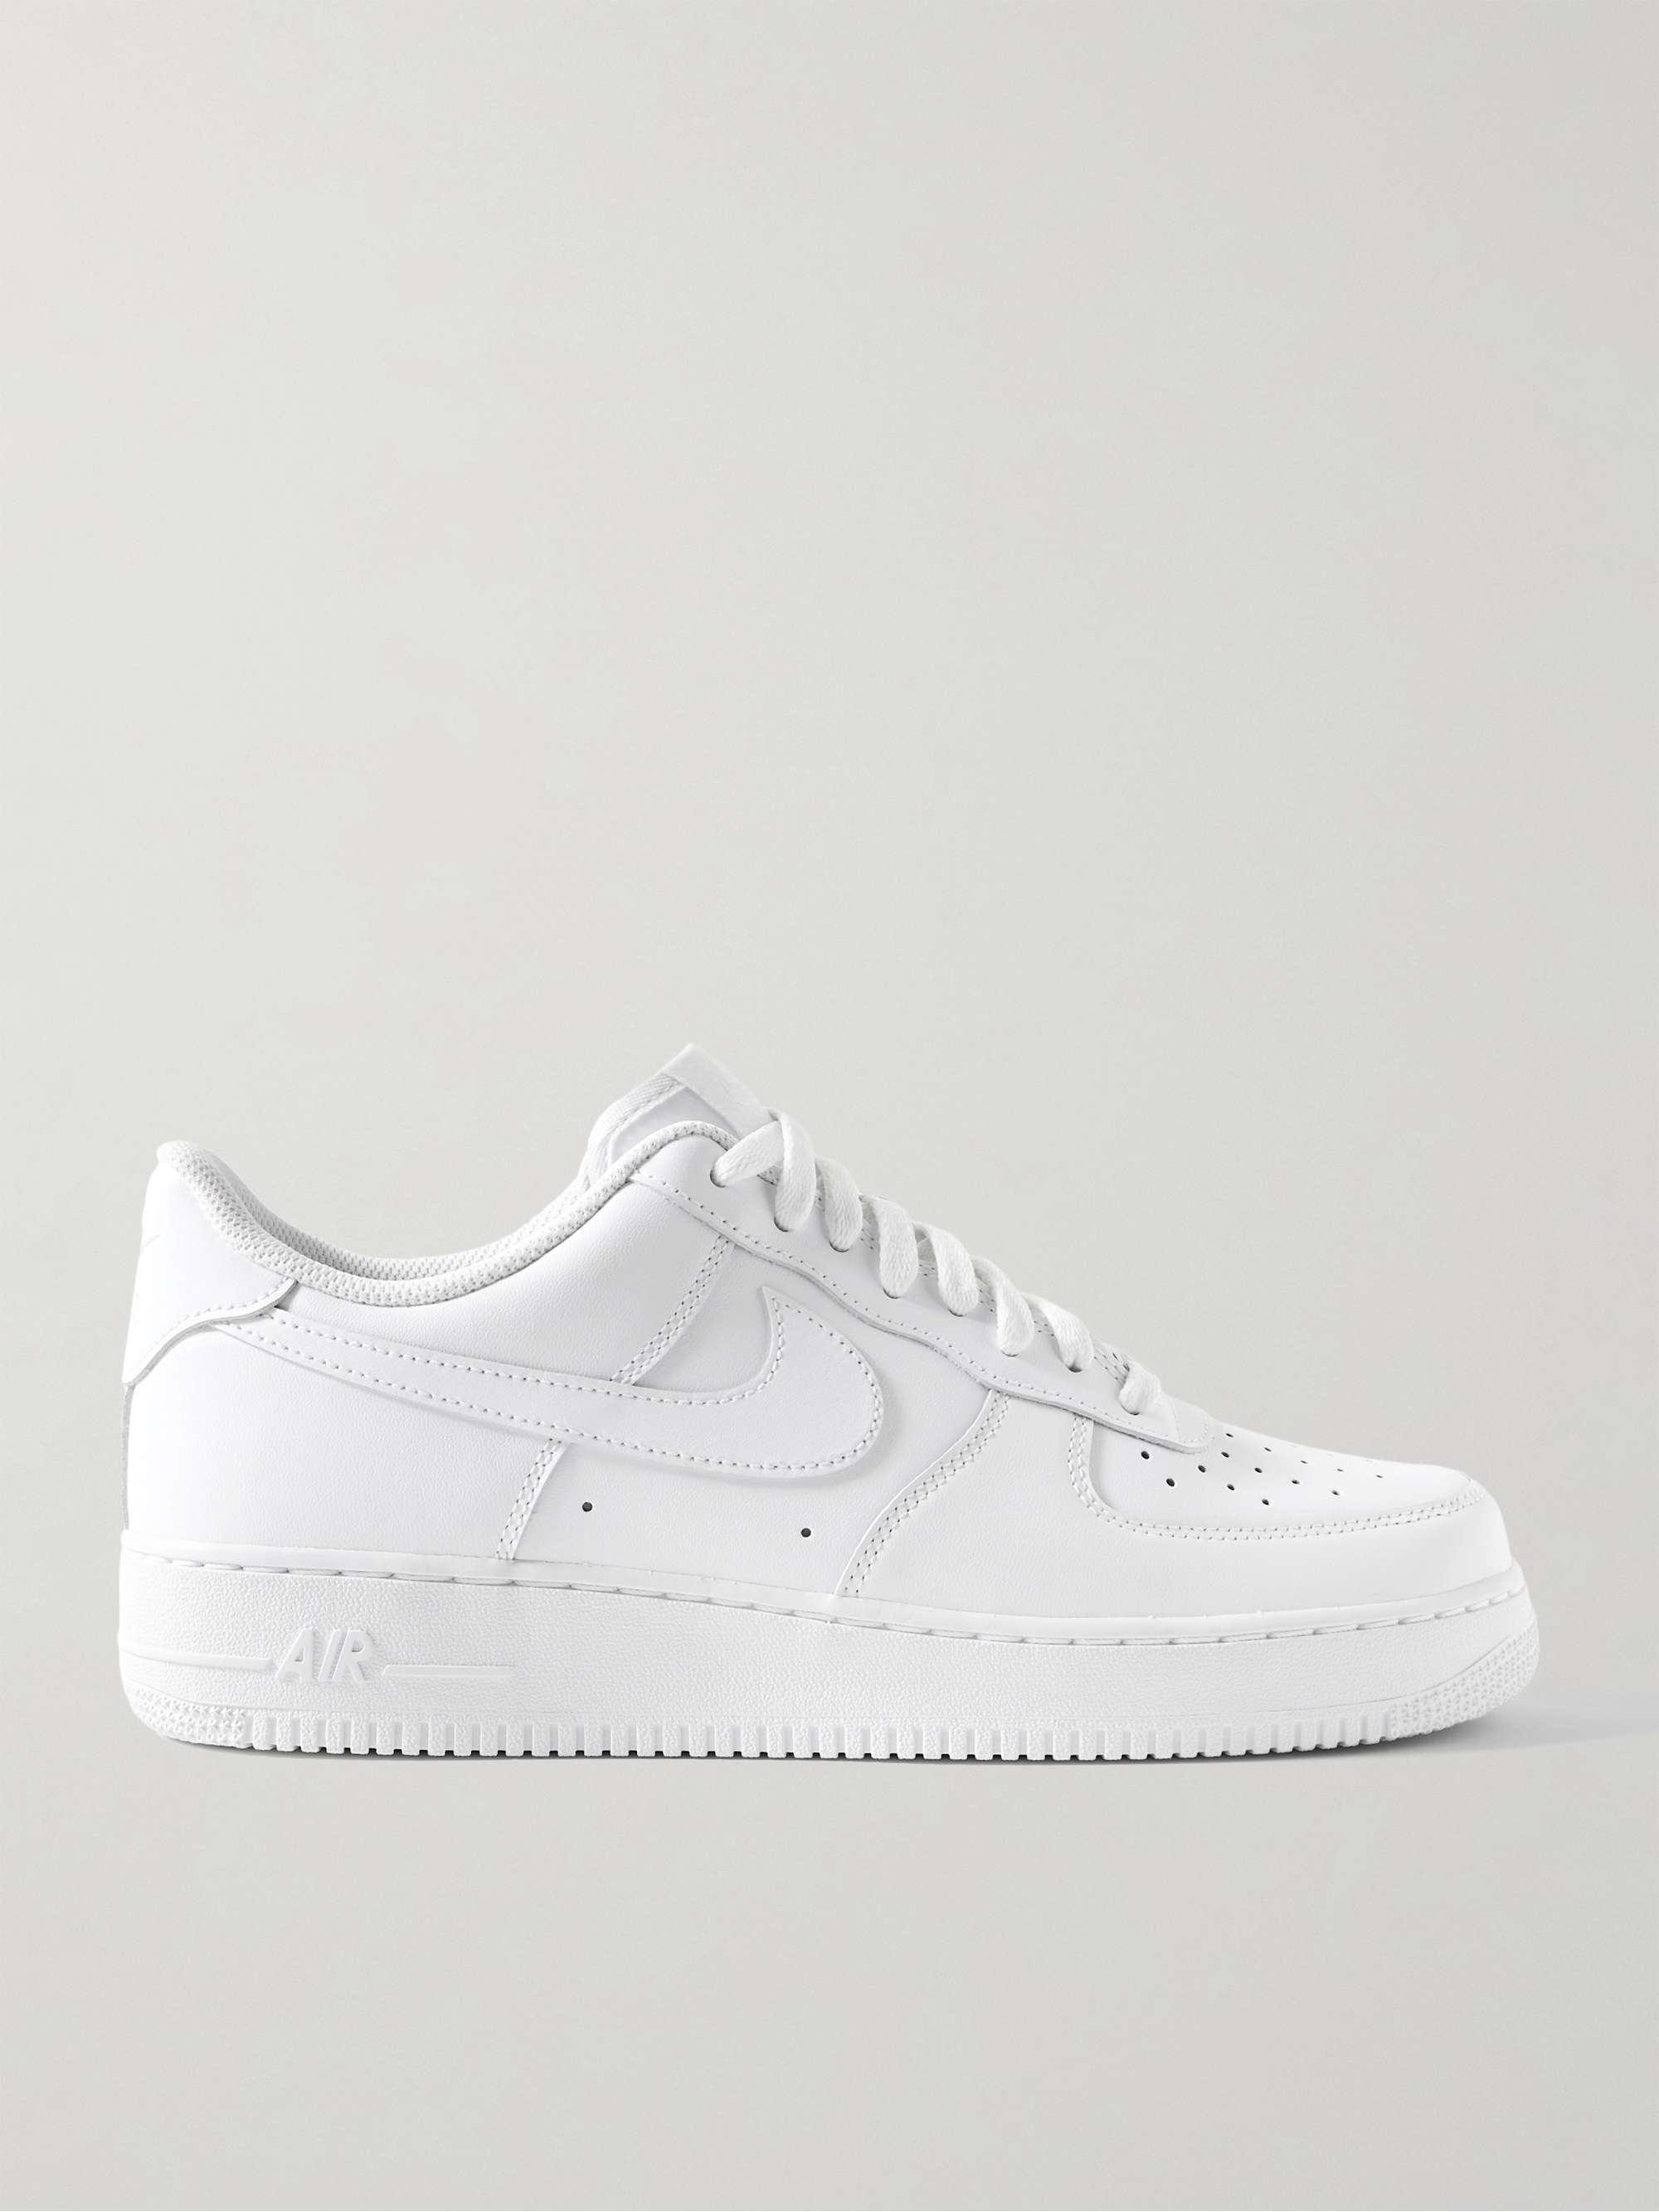 NIKE Air Force 1 '07 Leather Sneakers | MR PORTER